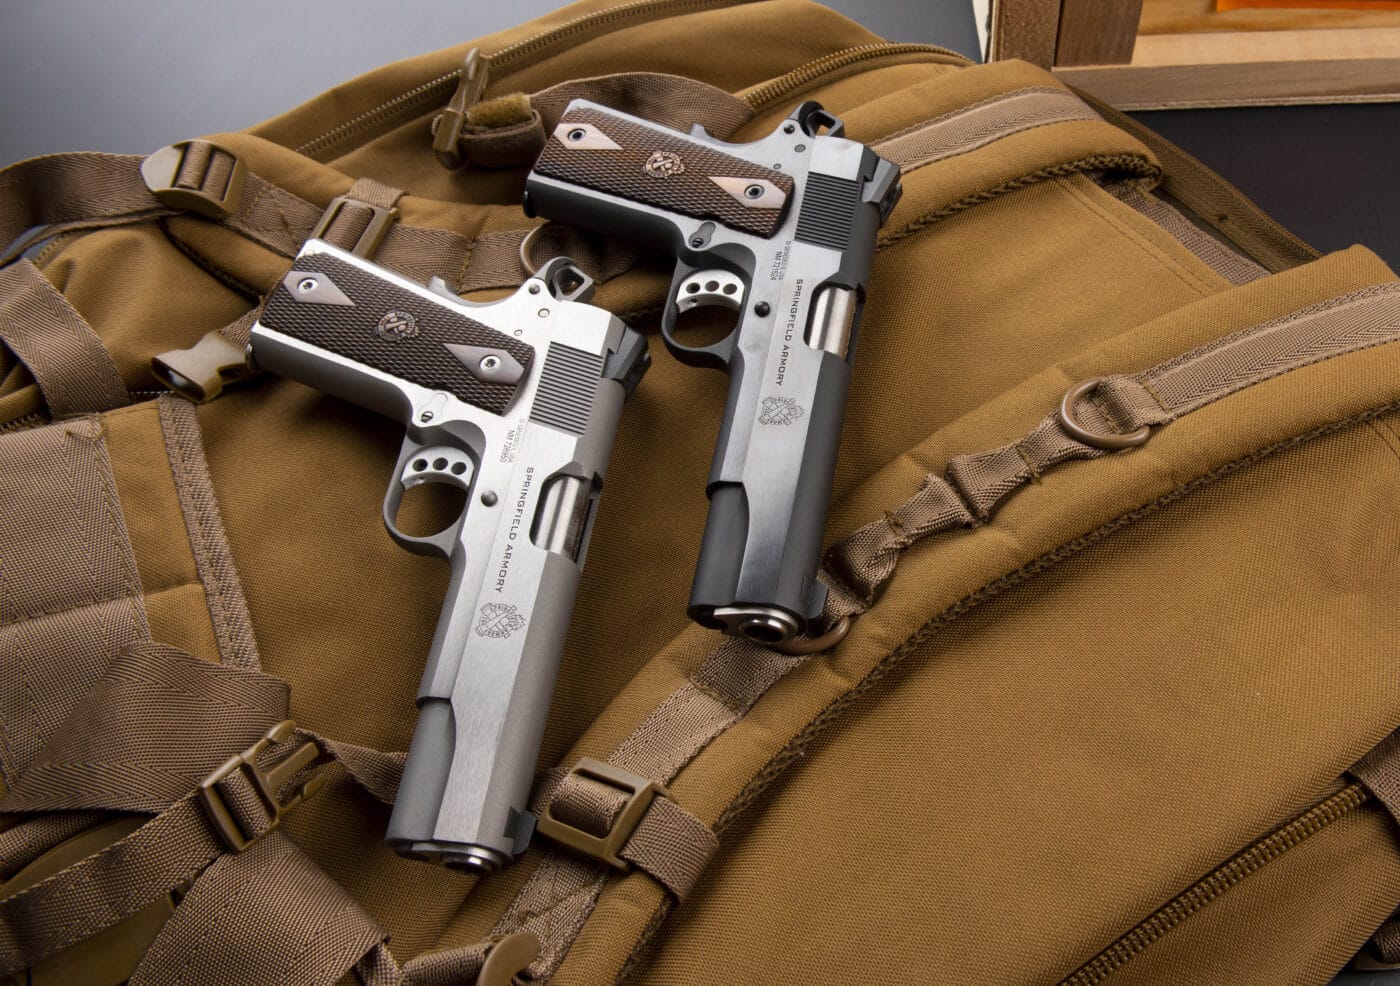 Two versions of the Garrison 1911 pistol by Springfield Armory